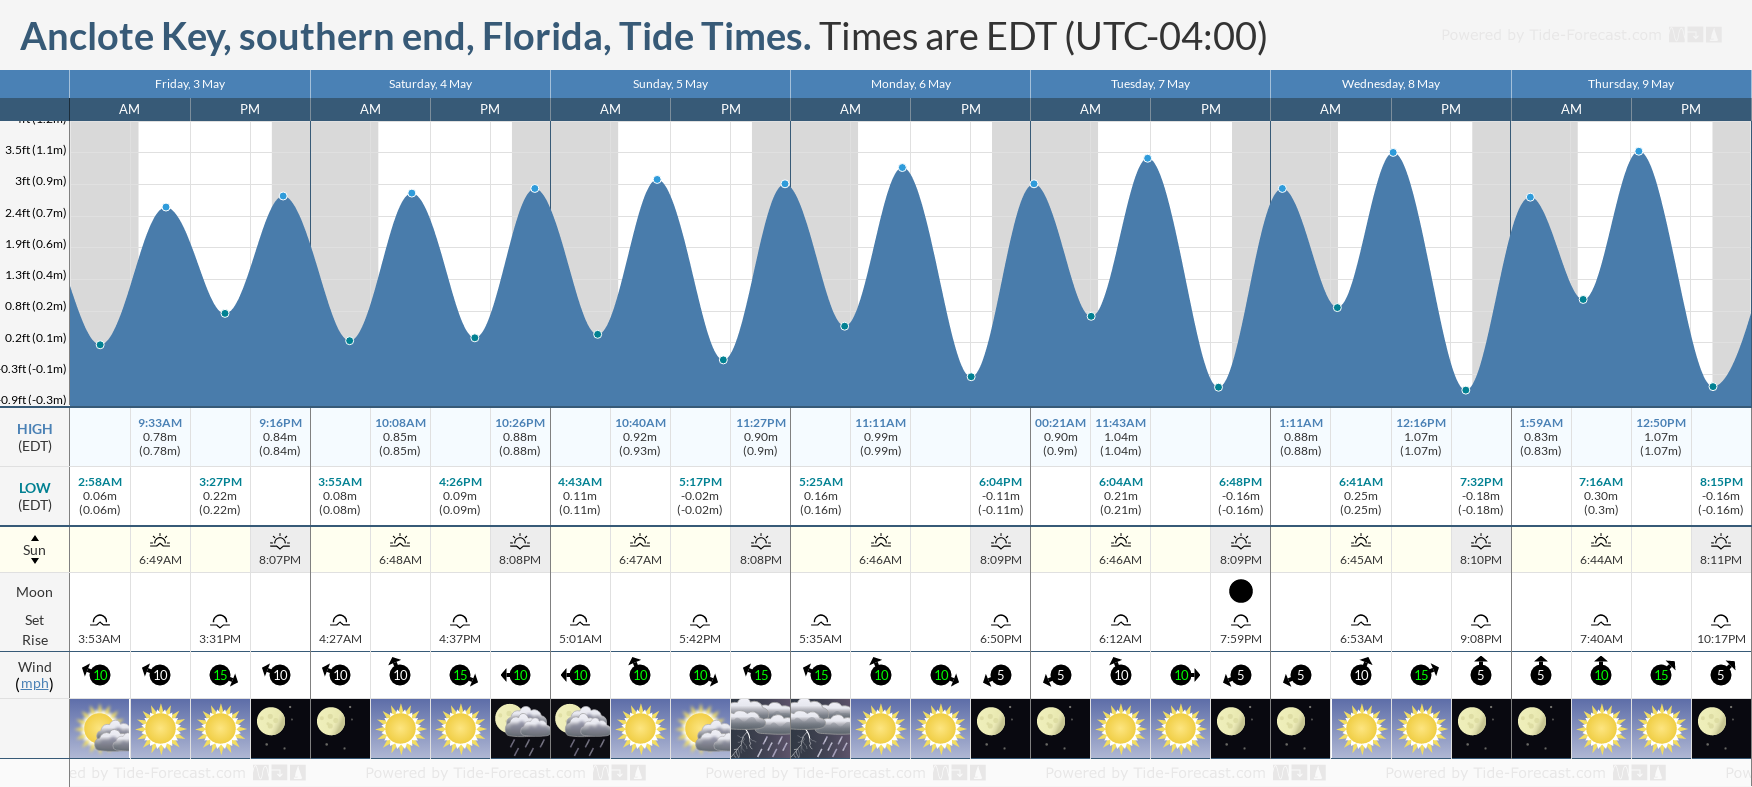 Anclote Key, southern end, Florida Tide Chart including high and low tide tide times for the next 7 days